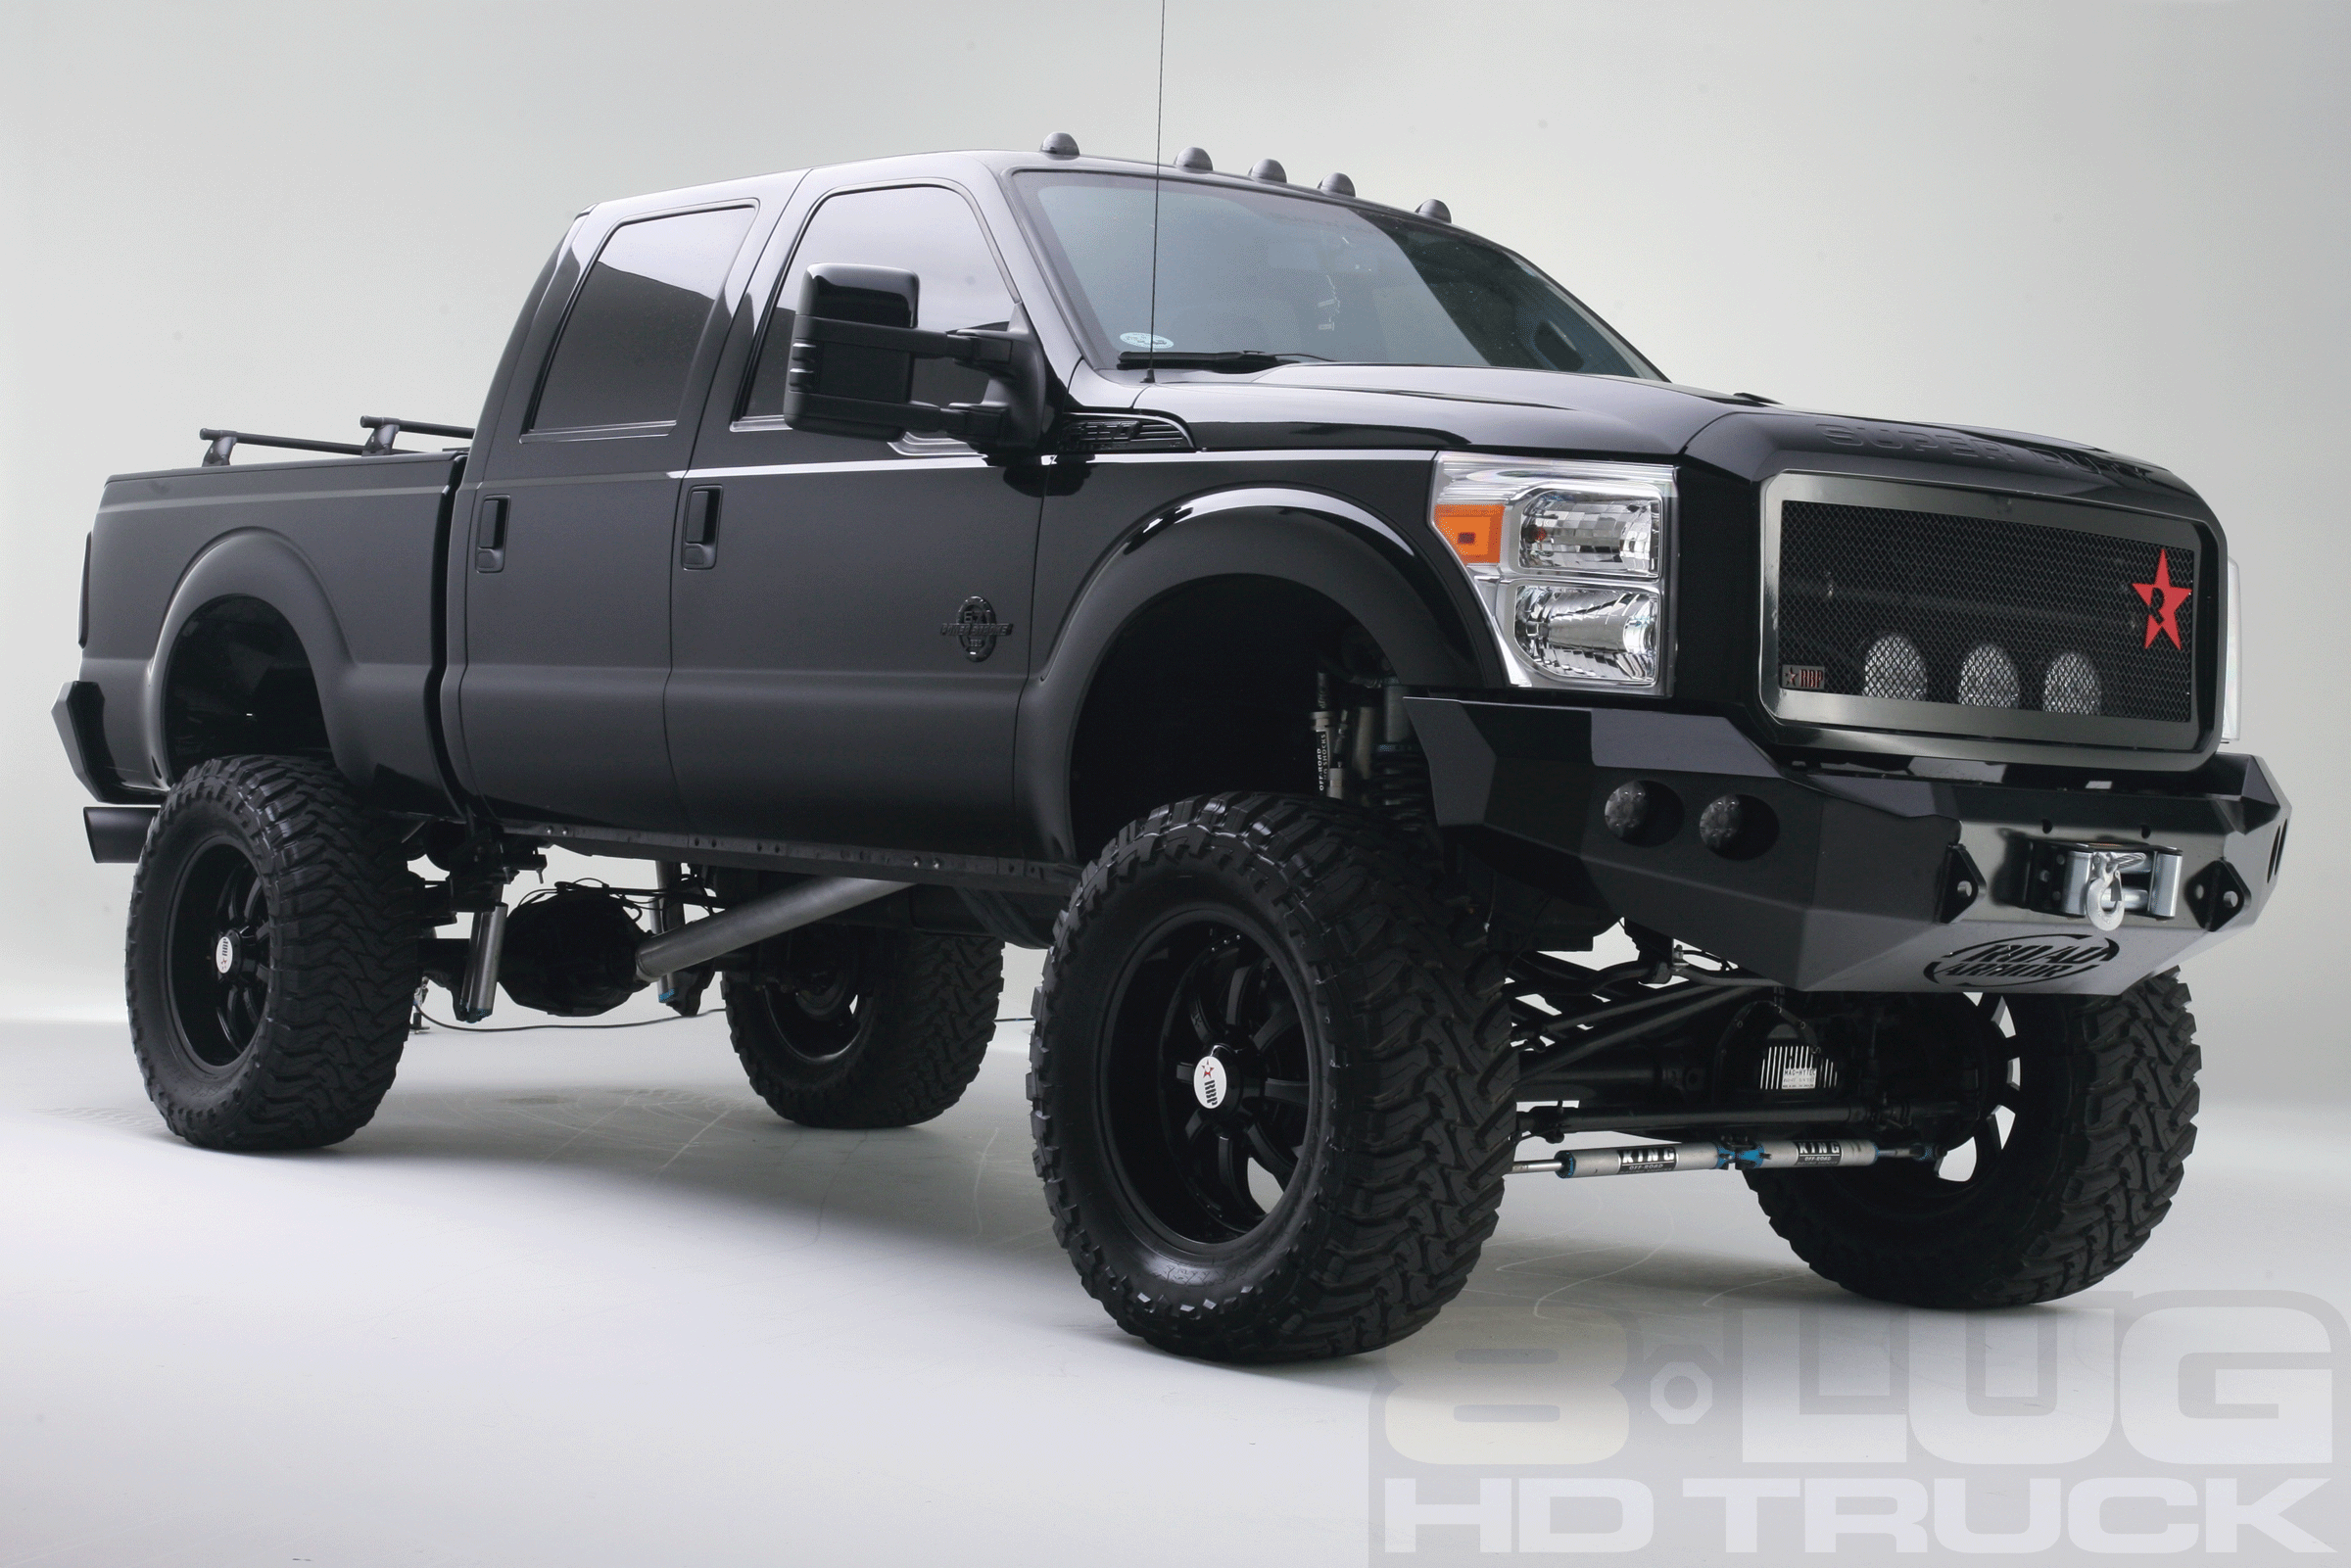 Free download Garage Editorial Changes To 8 Lug Ford F350 Powerstroke [2400x1601] for your Desktop, Mobile & Tablet. Explore 7.3 Powerstroke Wallpaper.3 Powerstroke Wallpaper, Powerstroke Wallpaper, Ford Powerstroke Wallpaper